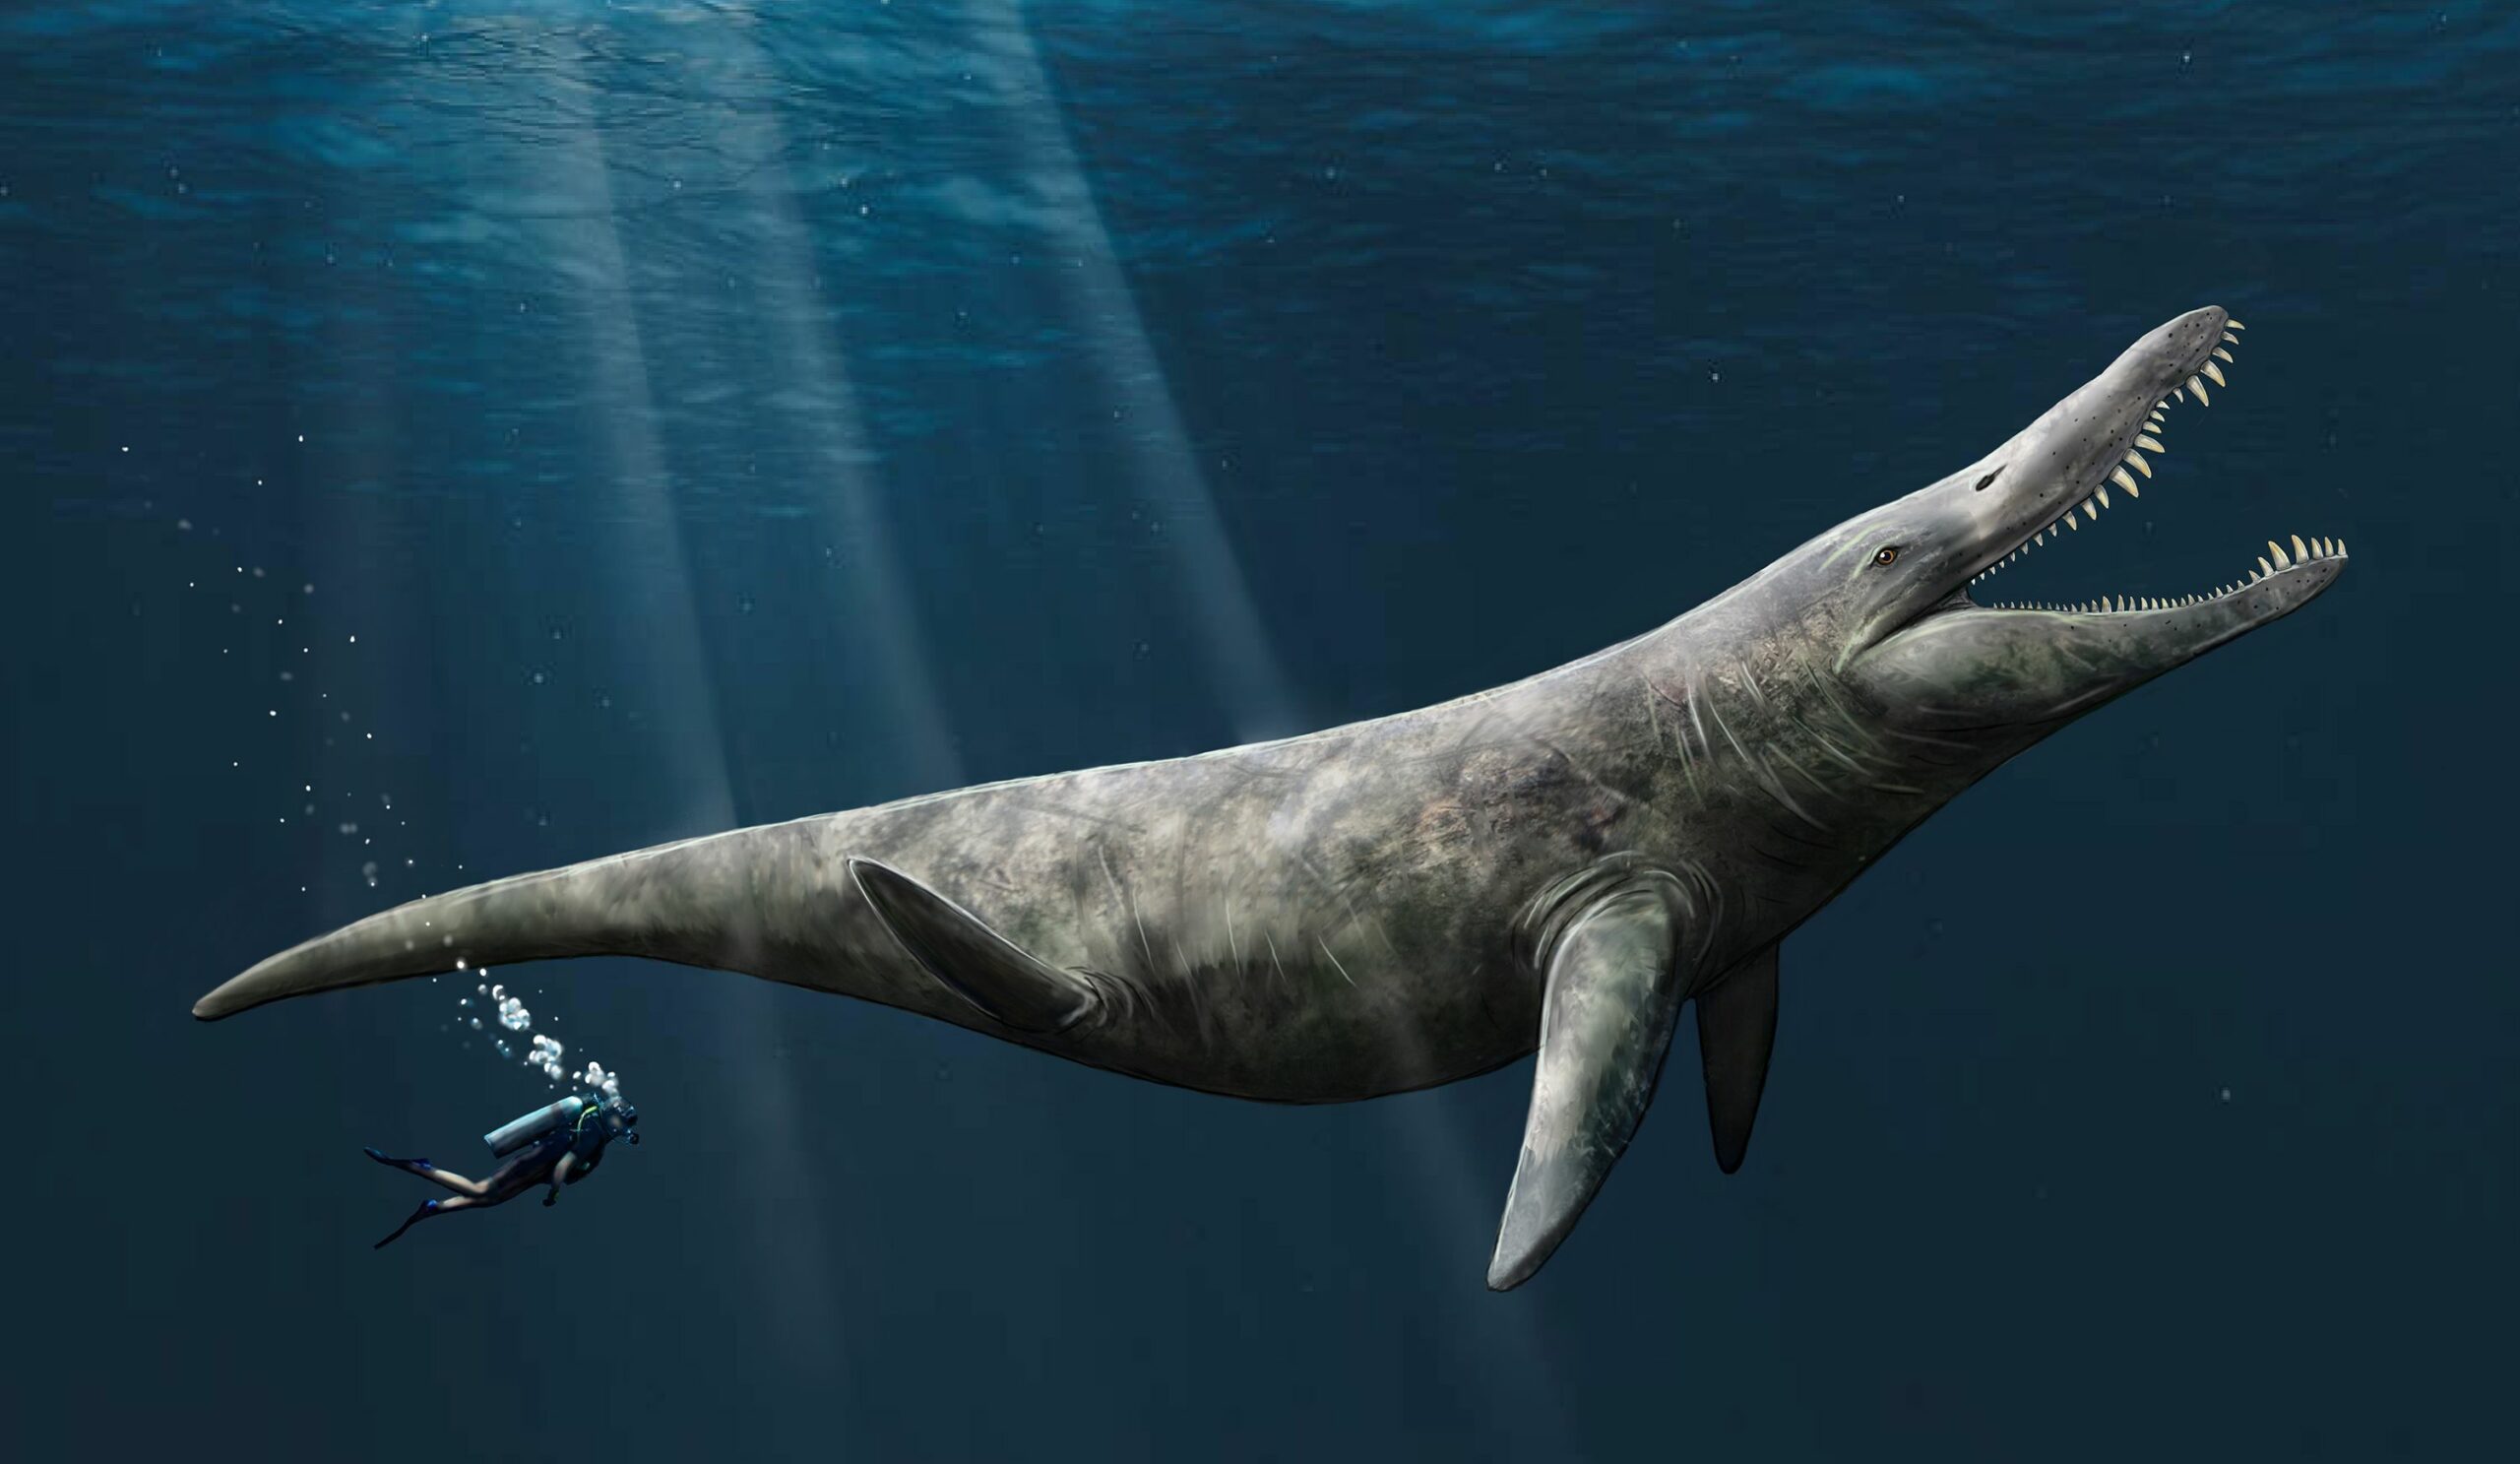 An artist’s impression of the pliosaur. University of Portsmouth paleontologists have discovered evidence suggesting that pliosaurs, closely related to the Liopleurodon, could have reached up to 14.4 meters in length, twice the size of a killer whale.